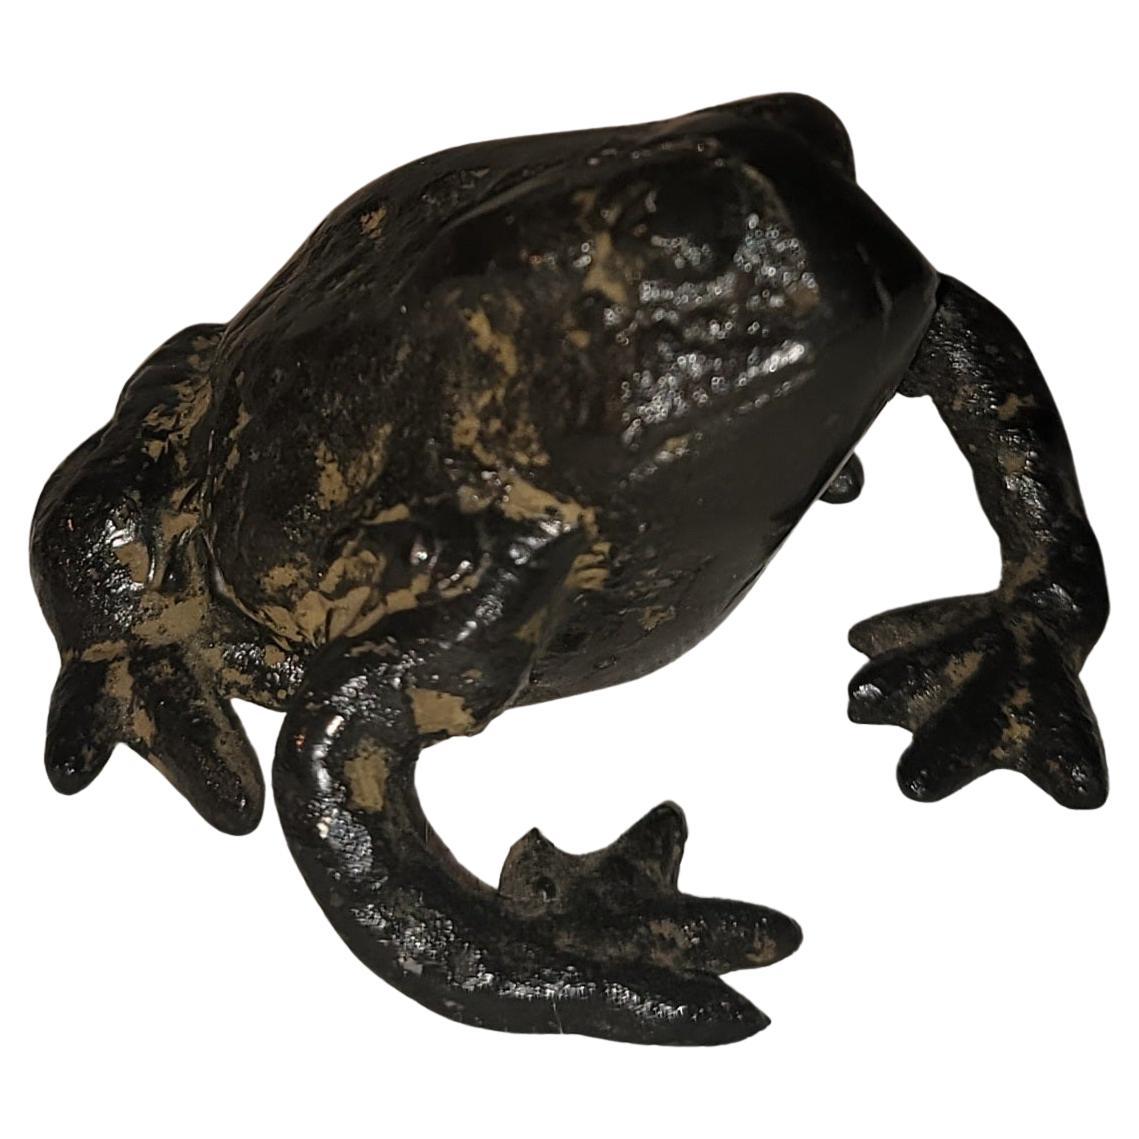 Small Frog Garden Ornament or Desk Weight.